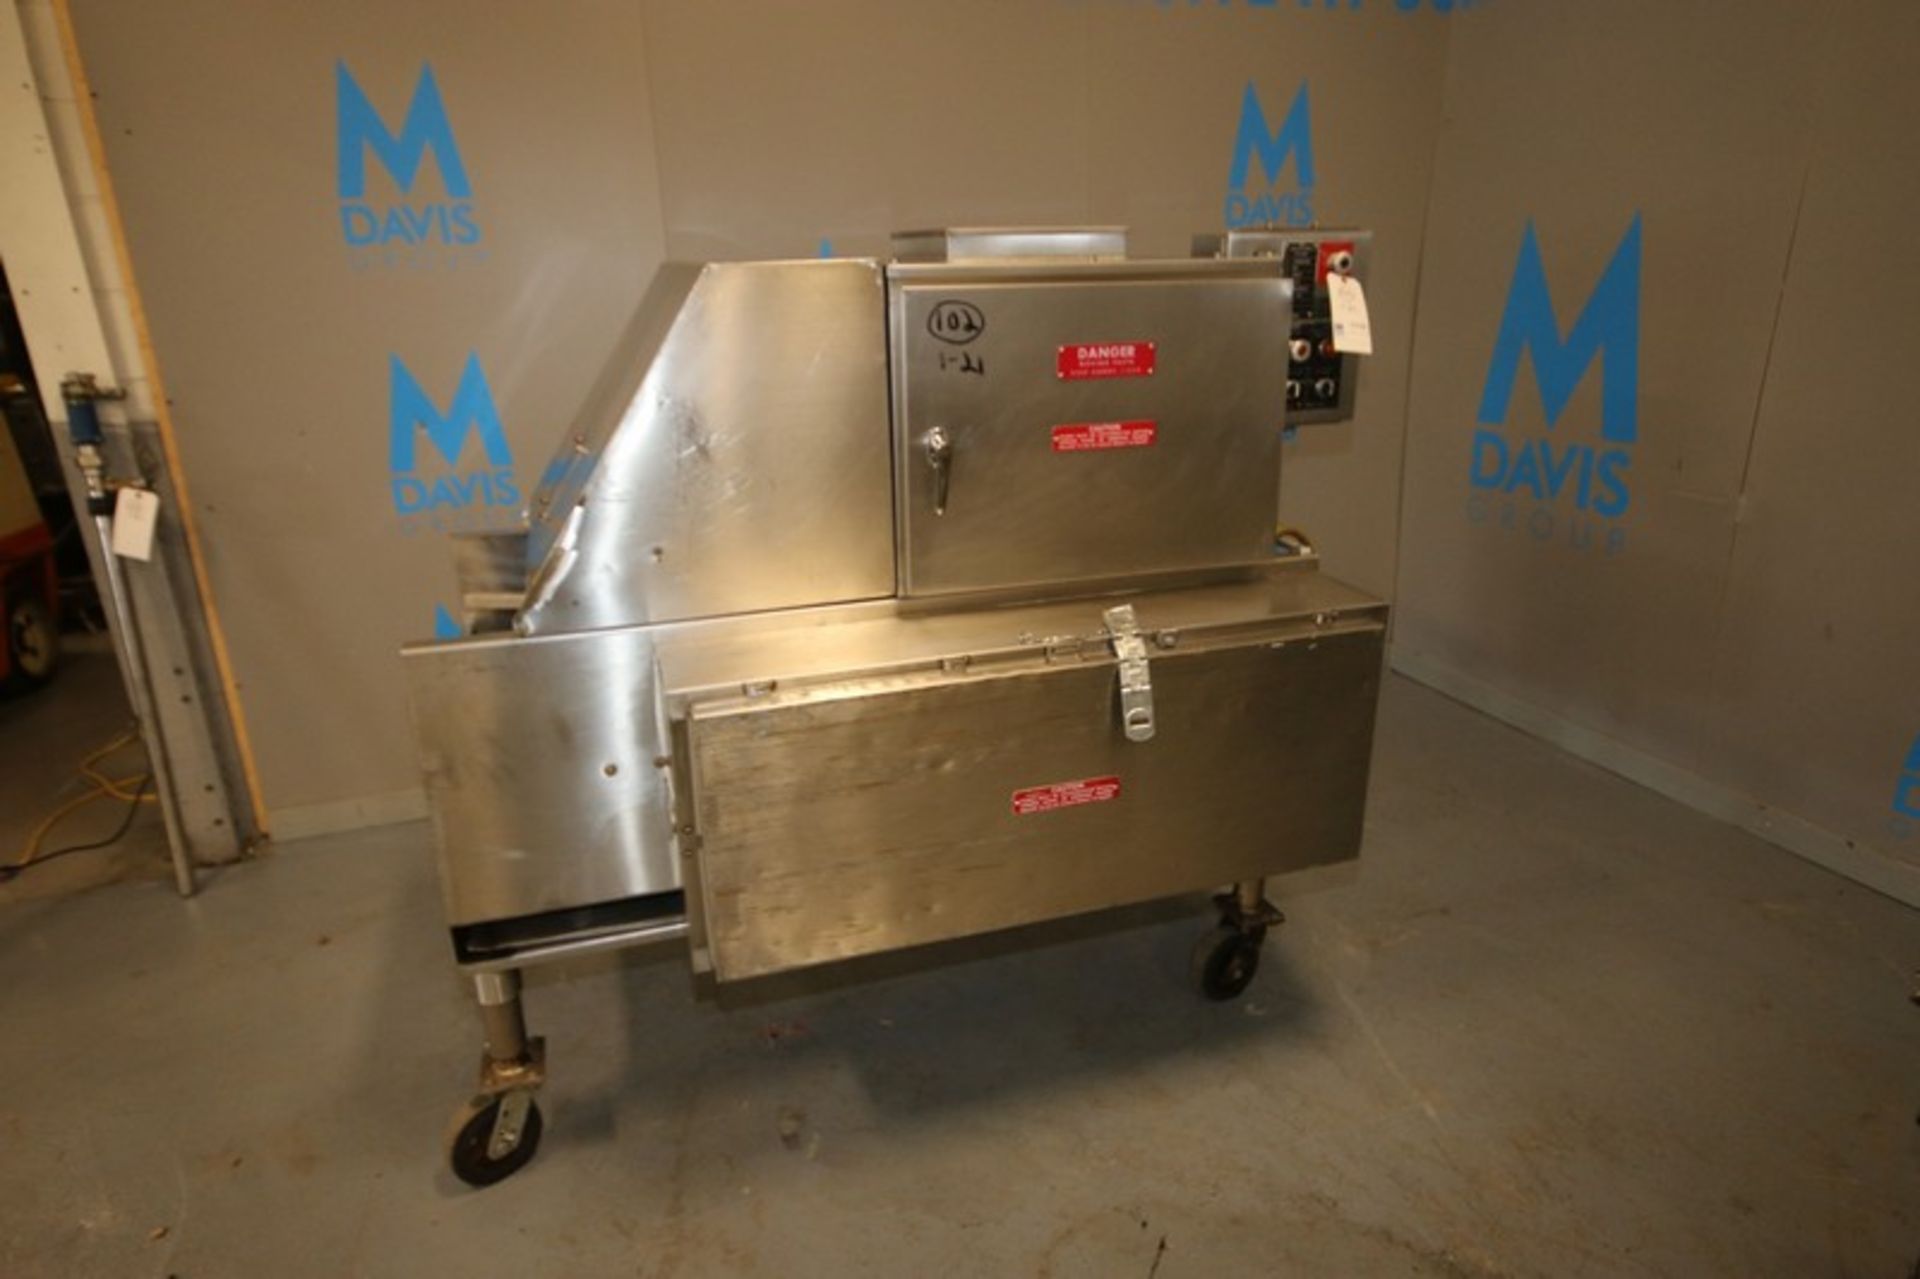 Mallet S/S Bread Pan Oiler,M/N 01A, S/N 242-456, 460 Volts, 3 Phase, Mounted on Portable Frame (